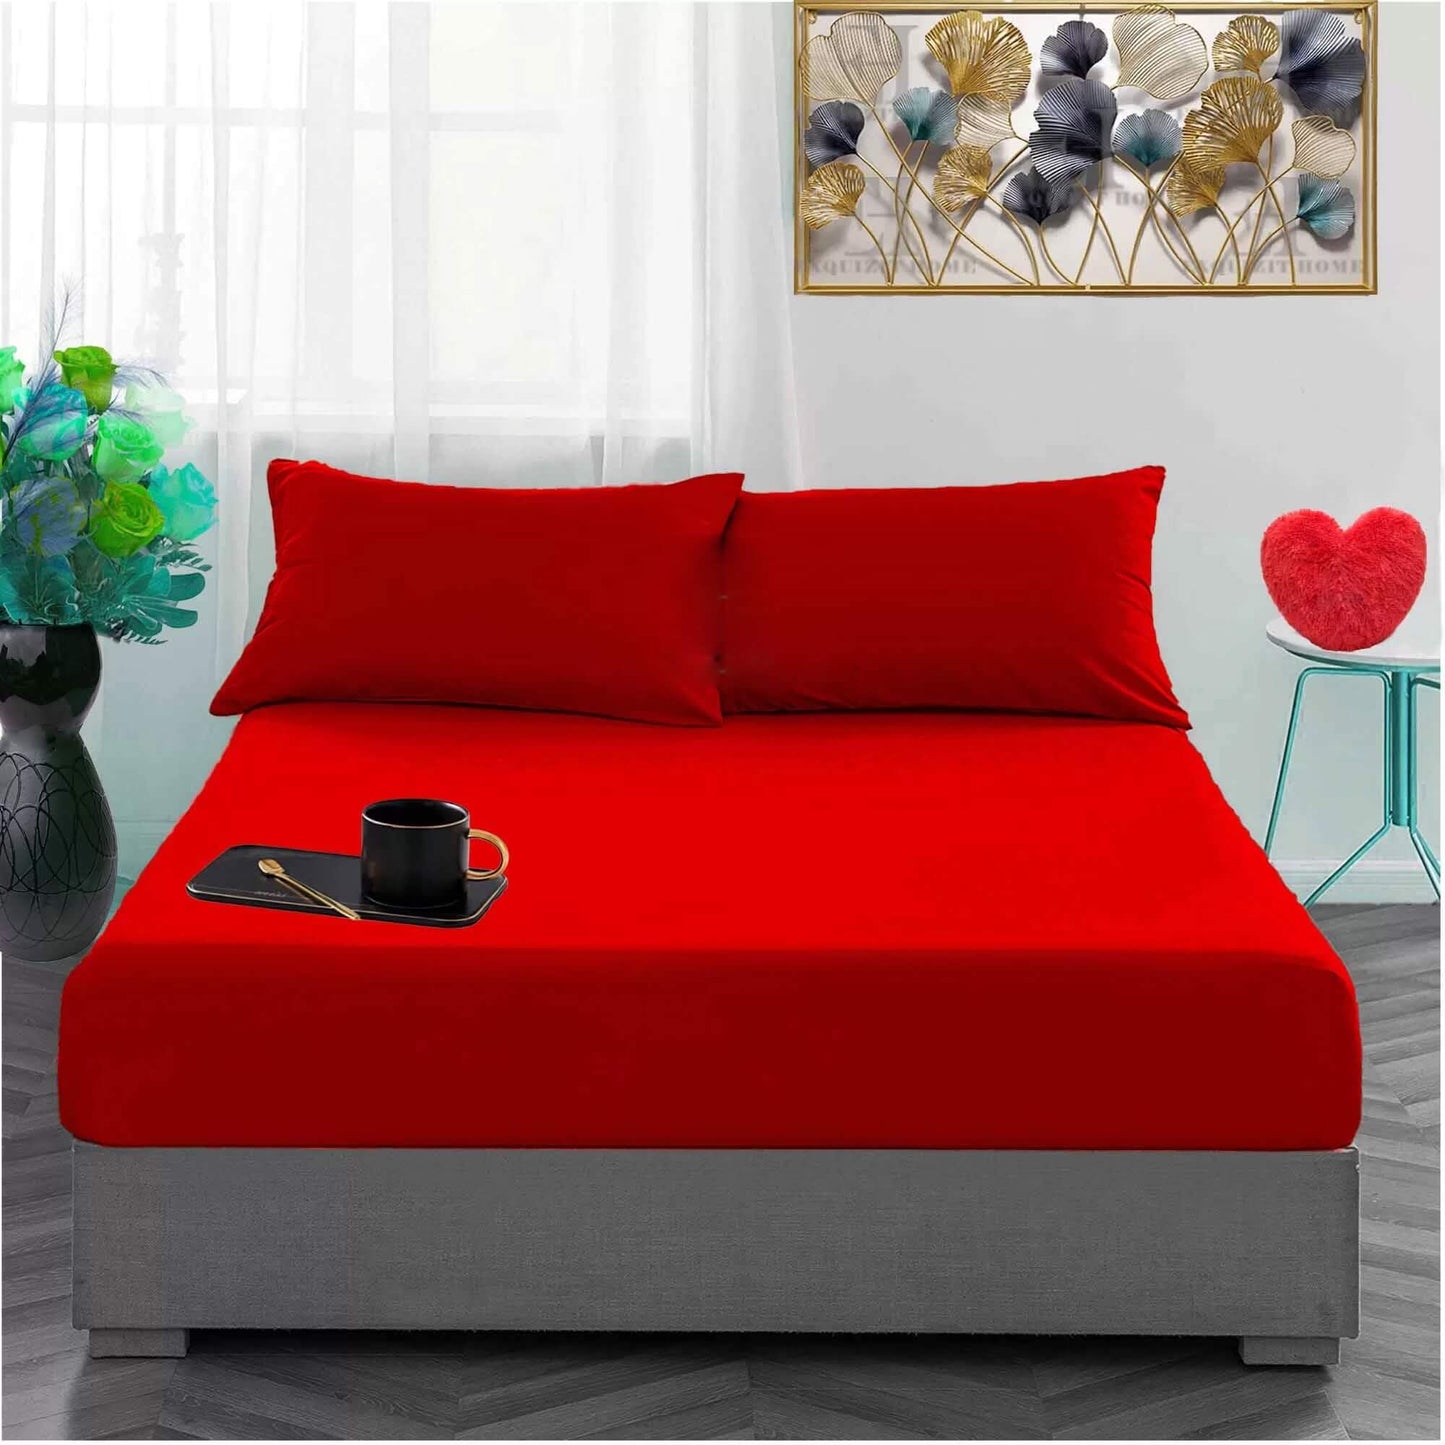 Small Double Fitted Sheet 100% Brushed Cotton Bed Sheet - TheComfortshop.co.ukBed Sheets0721718977278thecomfortshopTheComfortshop.co.ukFlannelette FIT Red 4FT-1Red4FT Small DoubleSmall Double Fitted Sheet 100% Brushed Cotton Bed Sheet - TheComfortshop.co.uk